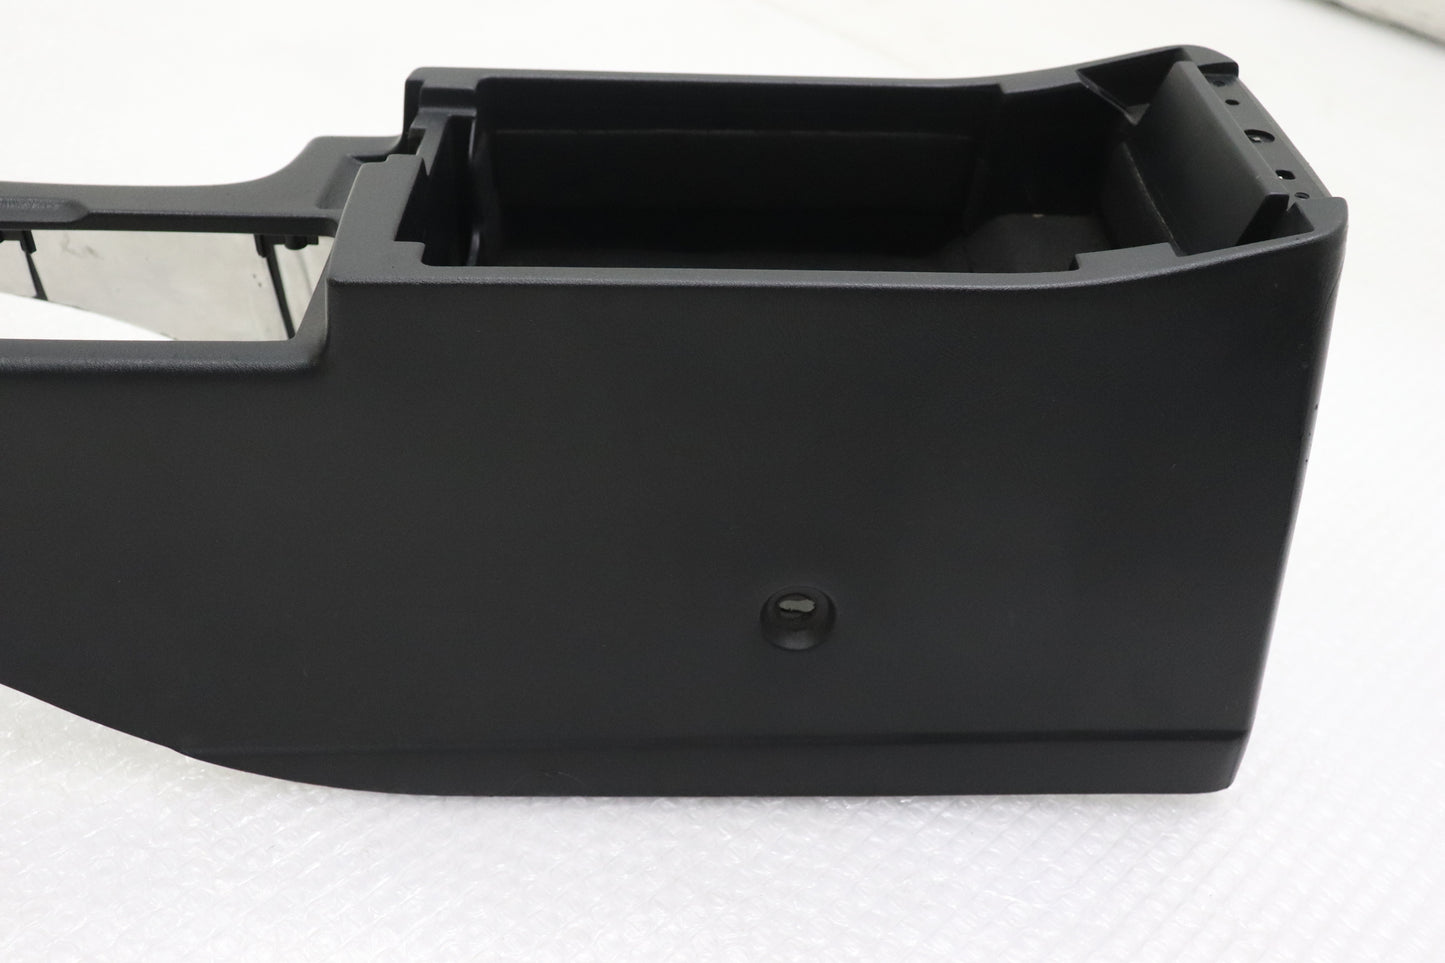 USED NISSAN OEM Center Console - BNR34